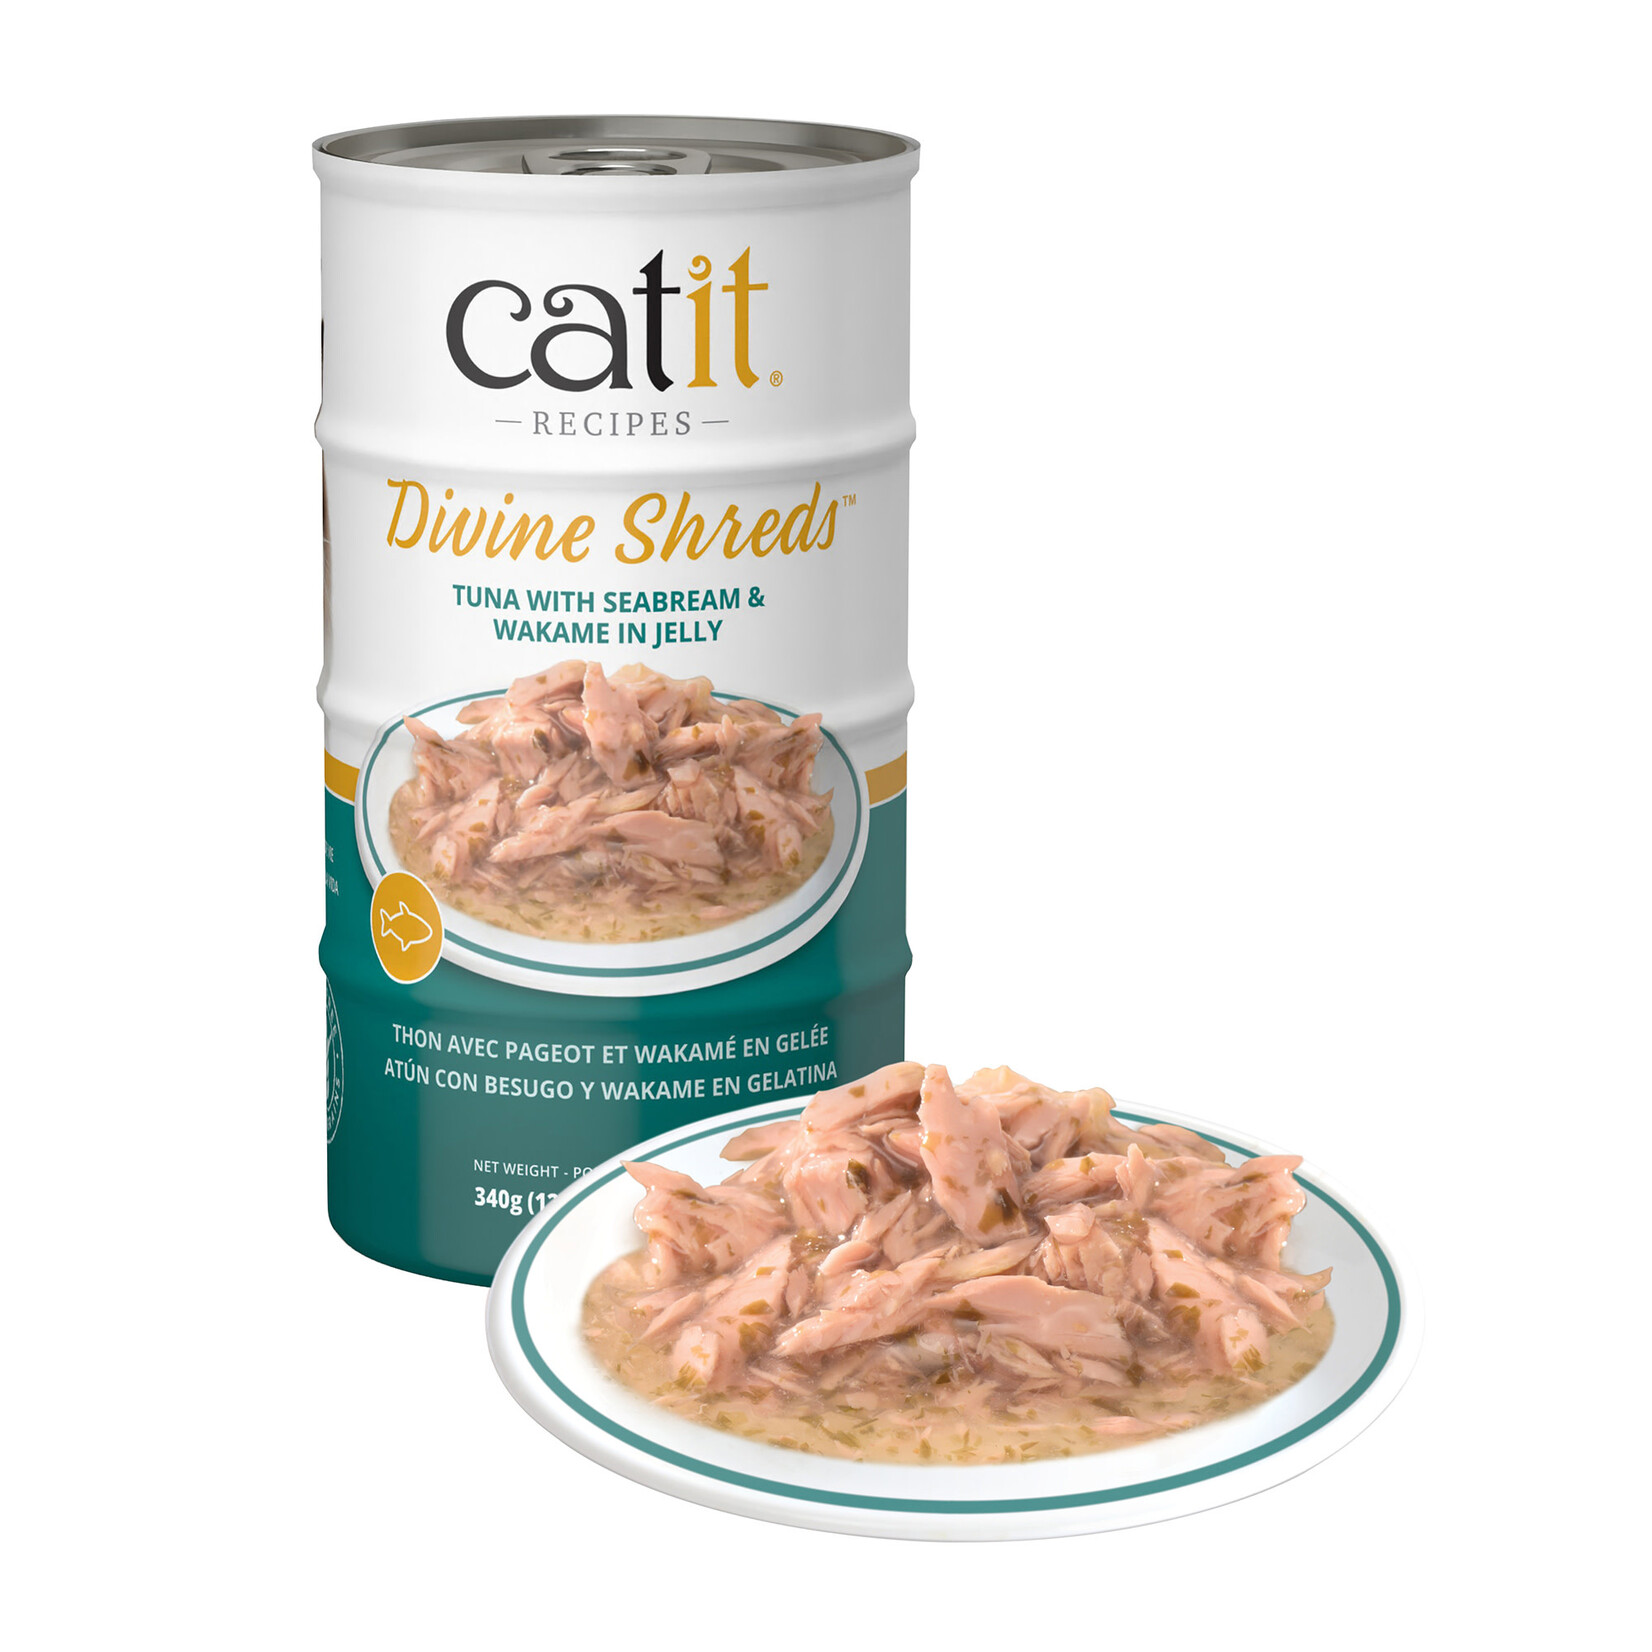 CAT IT Catit Divine Shreds - Tuna with Seabream & Wakame in Jelly - 4 x 85 g Cans